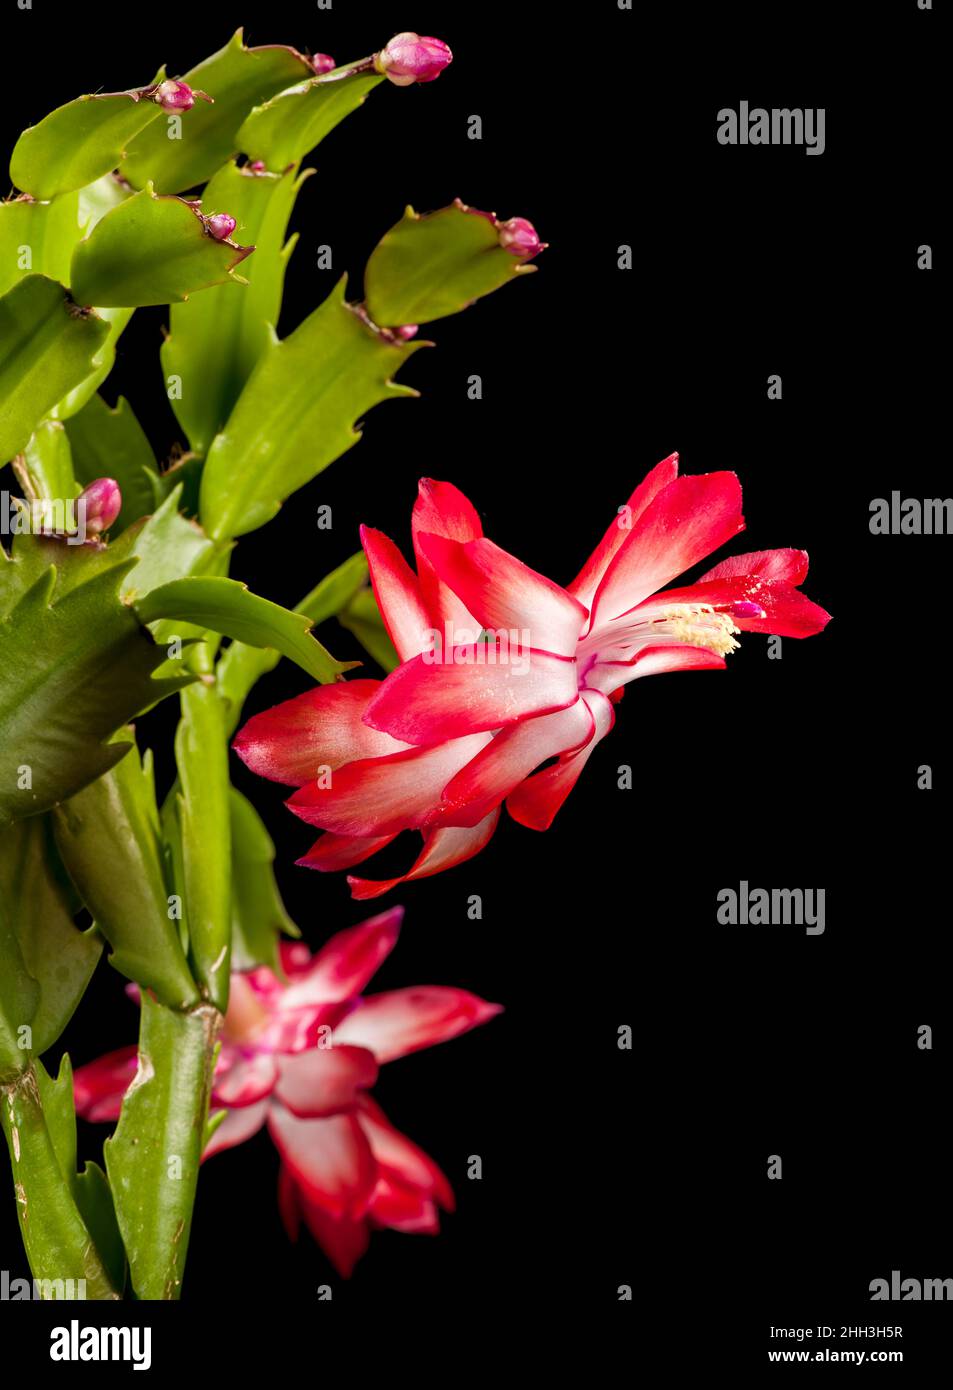 Vertical closeup of a Christmas cactus (lat: Schlumbergera) flower isolated on black at F16 aperture. Stock Photo